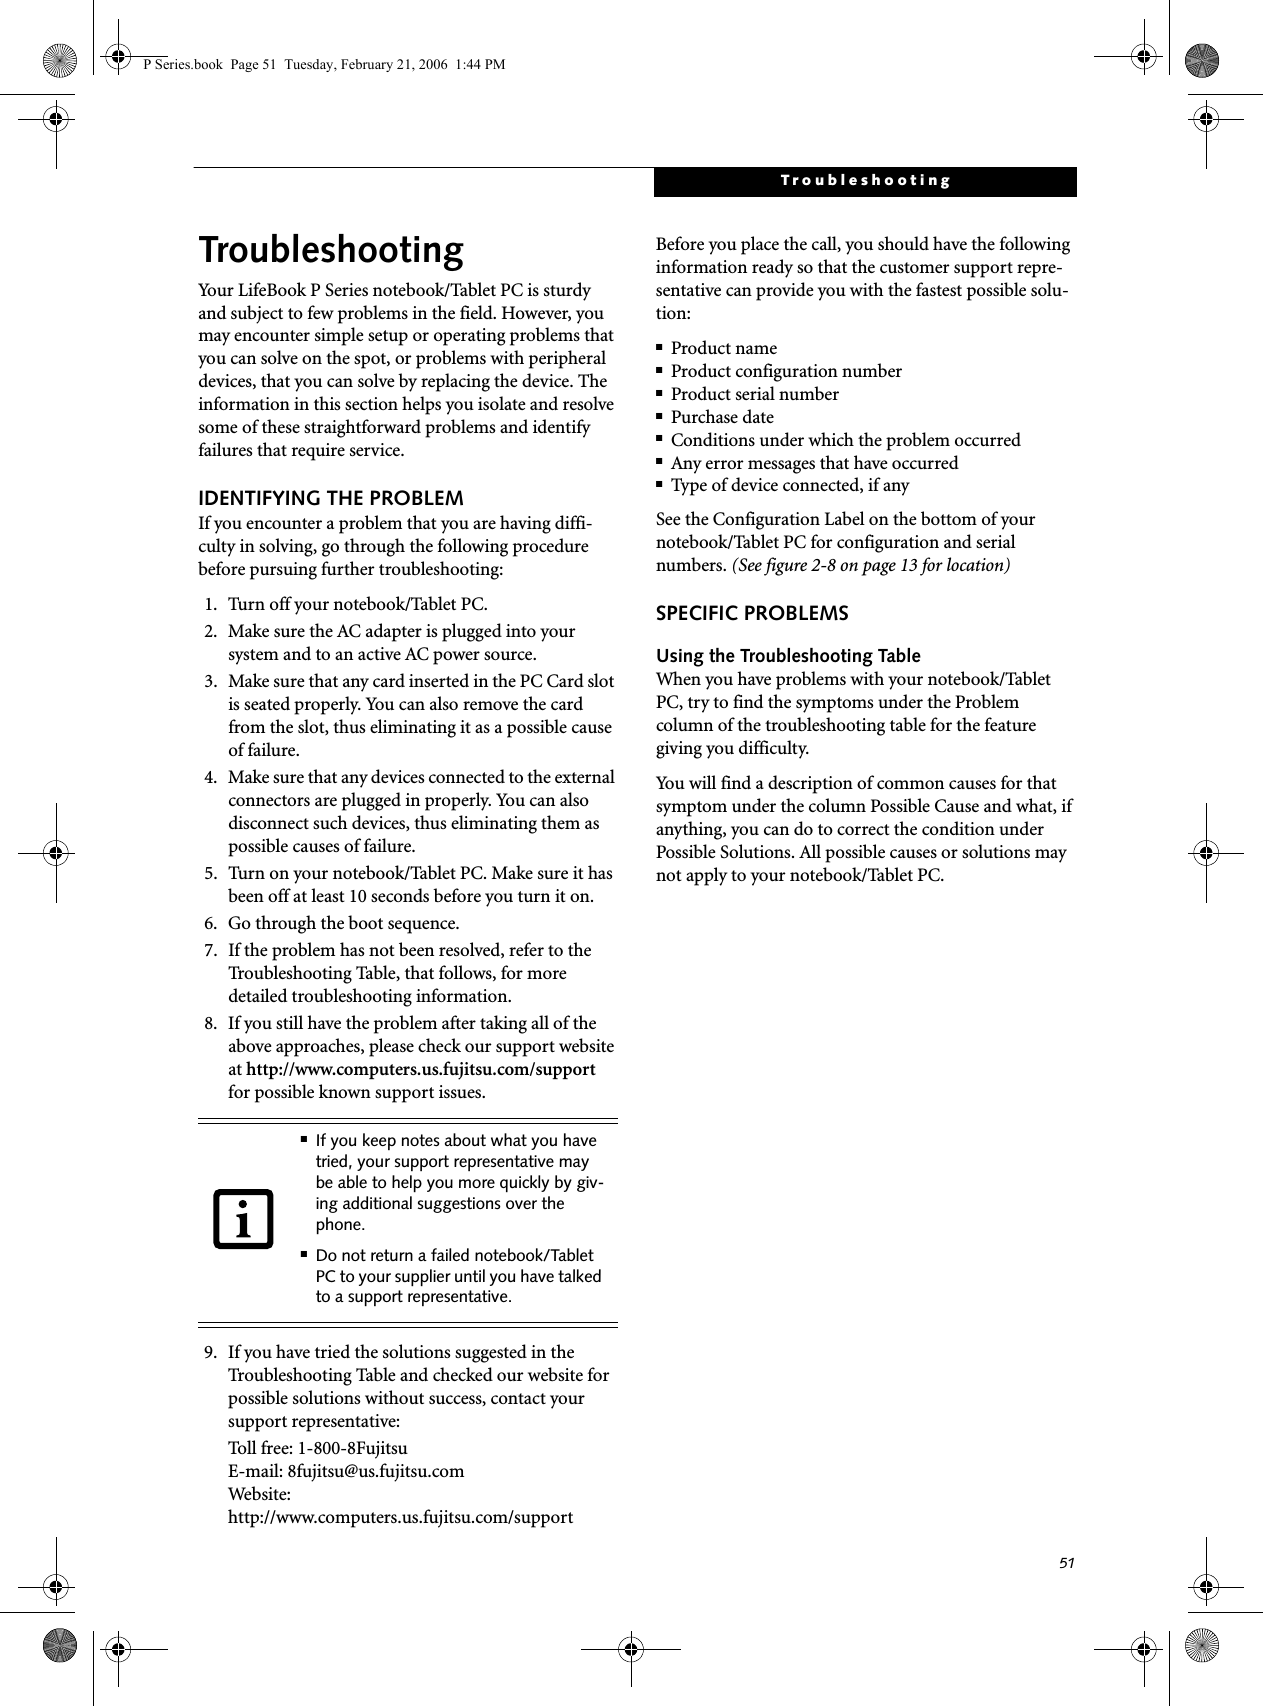 51TroubleshootingTroubleshootingYour LifeBook P Series notebook/Tablet PC is sturdy and subject to few problems in the field. However, you may encounter simple setup or operating problems that you can solve on the spot, or problems with peripheral devices, that you can solve by replacing the device. The information in this section helps you isolate and resolve some of these straightforward problems and identify failures that require service.IDENTIFYING THE PROBLEMIf you encounter a problem that you are having diffi-culty in solving, go through the following procedure before pursuing further troubleshooting:1. Turn off your notebook/Tablet PC.2. Make sure the AC adapter is plugged into your system and to an active AC power source.3. Make sure that any card inserted in the PC Card slot is seated properly. You can also remove the card from the slot, thus eliminating it as a possible cause of failure.4. Make sure that any devices connected to the external connectors are plugged in properly. You can also disconnect such devices, thus eliminating them as possible causes of failure.5. Turn on your notebook/Tablet PC. Make sure it has been off at least 10 seconds before you turn it on.6. Go through the boot sequence.7. If the problem has not been resolved, refer to the Troubleshooting Table, that follows, for more detailed troubleshooting information.8. If you still have the problem after taking all of the above approaches, please check our support website at http://www.computers.us.fujitsu.com/support for possible known support issues. 9. If you have tried the solutions suggested in the Troubleshooting Table and checked our website for possible solutions without success, contact your support representative: Toll free: 1-800-8Fujitsu E-mail: 8fujitsu@us.fujitsu.comWe bs ite : http://www.computers.us.fujitsu.com/supportBefore you place the call, you should have the following information ready so that the customer support repre-sentative can provide you with the fastest possible solu-tion:■Product name■Product configuration number■Product serial number■Purchase date■Conditions under which the problem occurred■Any error messages that have occurred■Type of device connected, if anySee the Configuration Label on the bottom of yournotebook/Tablet PC for configuration and serial numbers. (See figure 2-8 on page 13 for location)SPECIFIC PROBLEMSUsing the Troubleshooting TableWhen you have problems with your notebook/Tablet PC, try to find the symptoms under the Problem column of the troubleshooting table for the feature giving you difficulty. You will find a description of common causes for that symptom under the column Possible Cause and what, if anything, you can do to correct the condition under Possible Solutions. All possible causes or solutions may not apply to your notebook/Tablet PC.■If you keep notes about what you have tried, your support representative may be able to help you more quickly by giv-ing additional suggestions over the phone.■Do not return a failed notebook/Tablet PC to your supplier until you have talked to a support representative.P Series.book  Page 51  Tuesday, February 21, 2006  1:44 PM